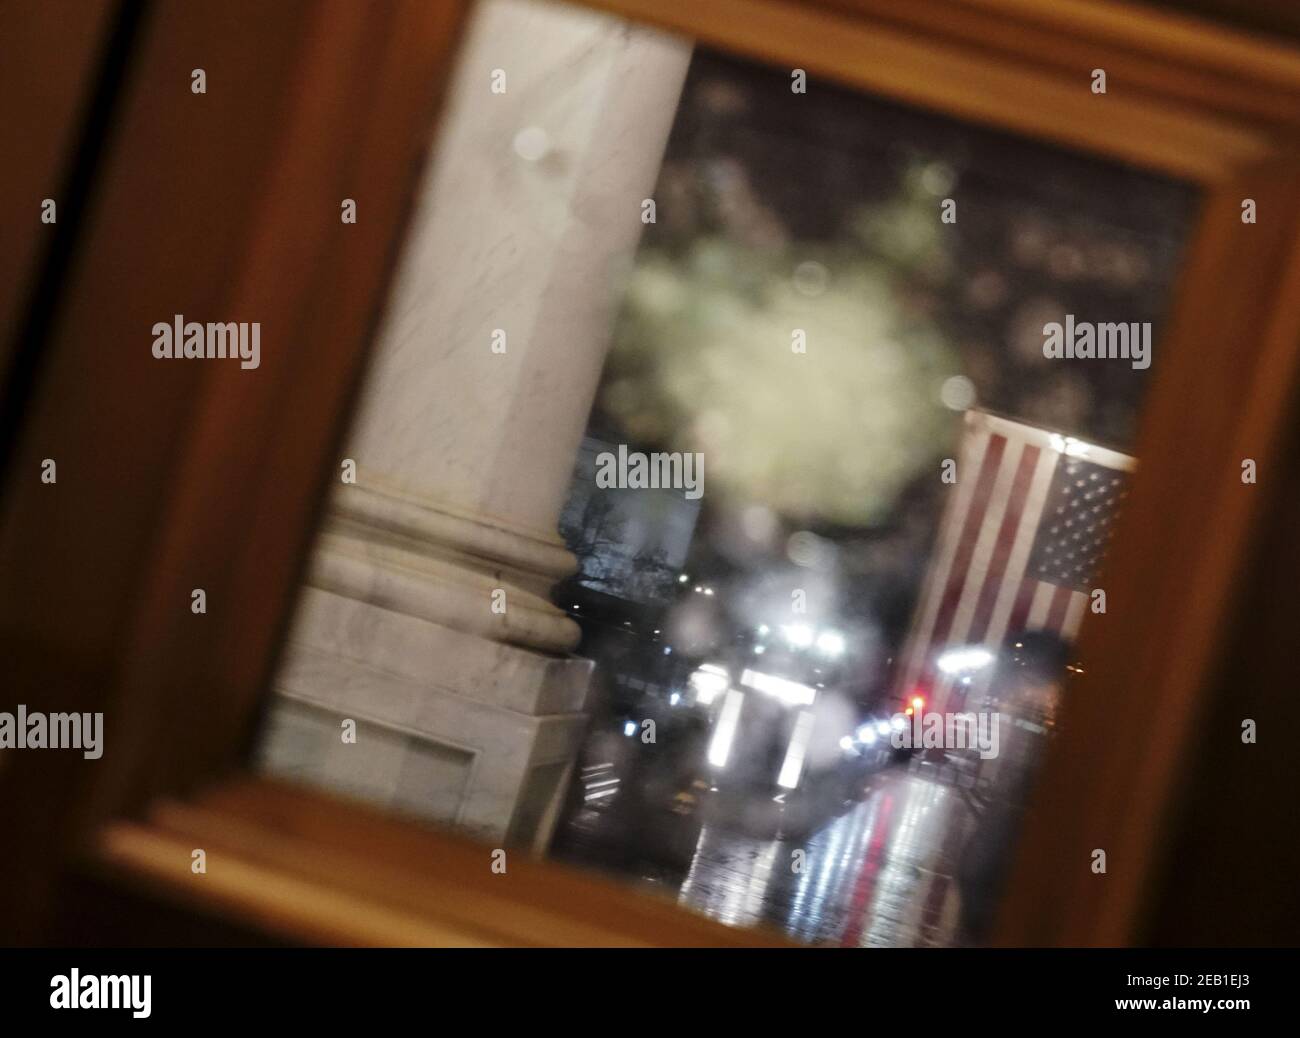 Washington, United States. 11th Feb, 2021. The American flag is seen reflected in a glass-paneled door that was shattered by rioters on January 6 at the U.S. Capitol building in Washington, DC on Wednesday, February 10, 2021. On the morning of February 11, workers were seen replacing the shattered glass. Photo by Leigh Vogel/UPI Credit: UPI/Alamy Live News Stock Photo